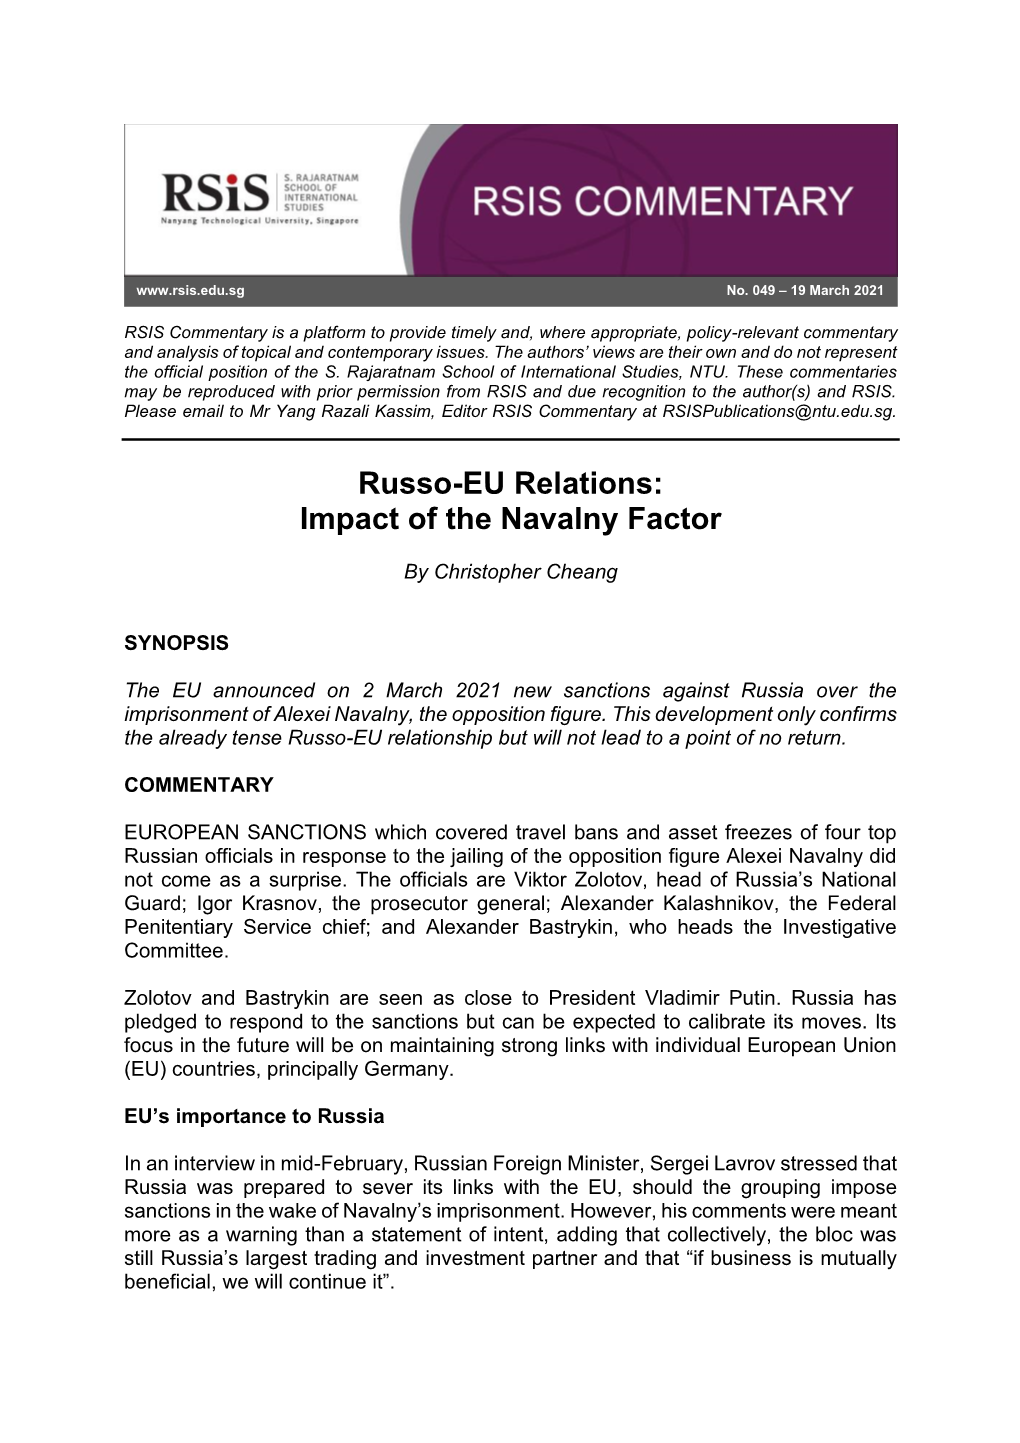 Russo-EU Relations: Impact of the Navalny Factor